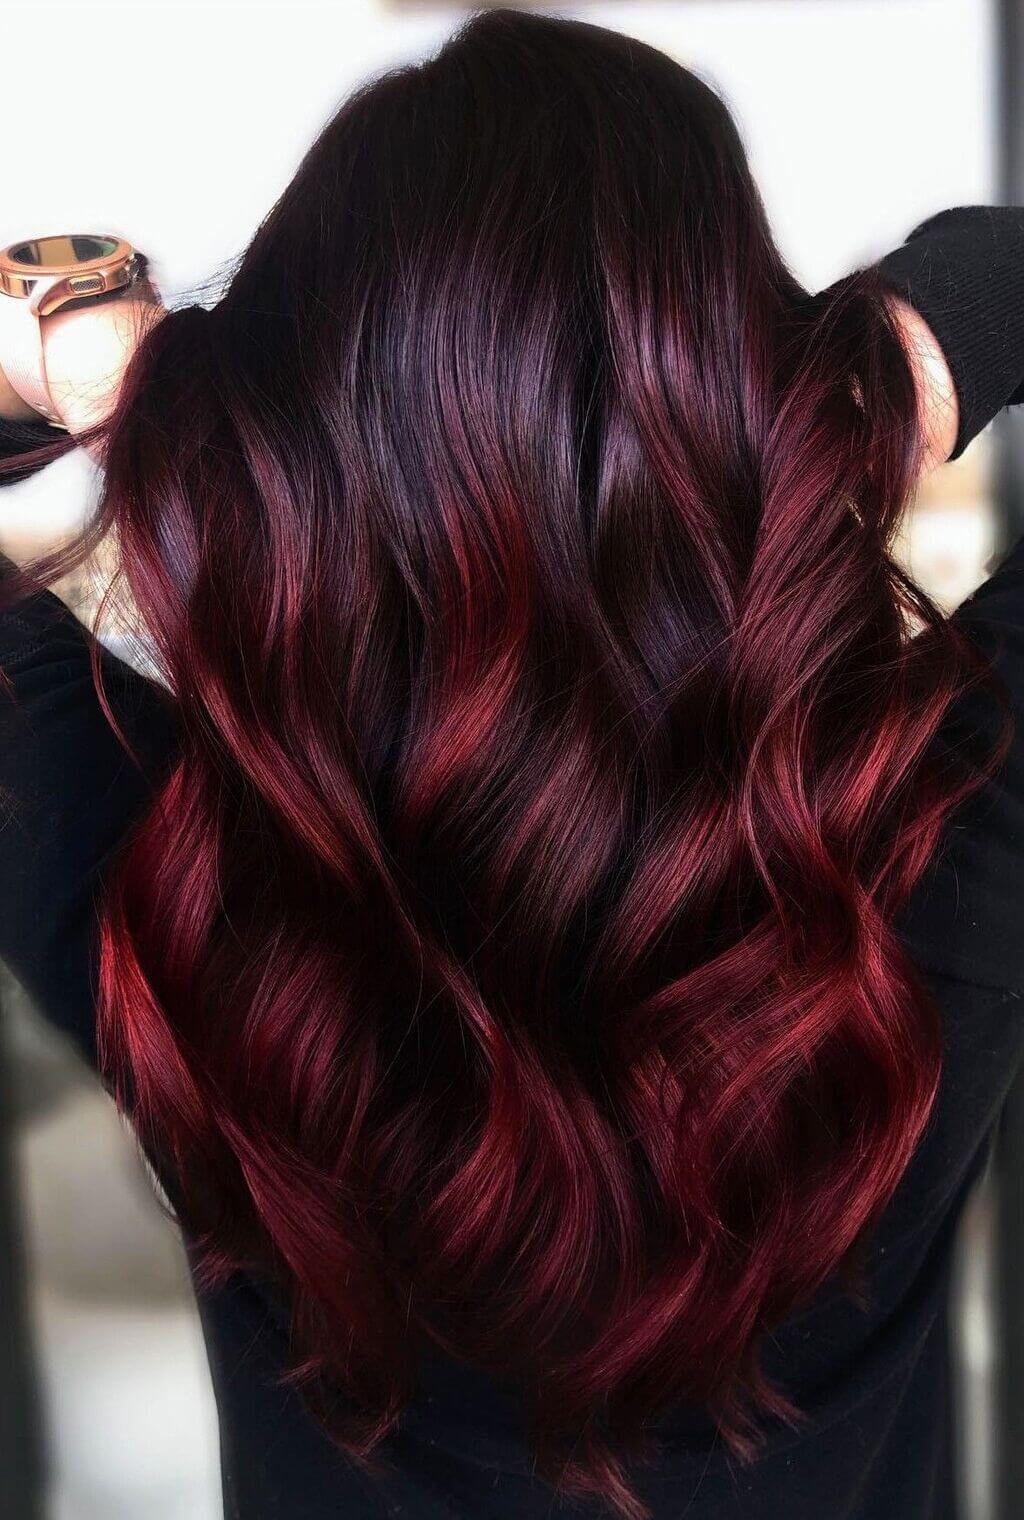 chrome salon - Ben did this deep burgundy Balayage on dark hair for a bold  and beautiful look . Call or text for an appointment | Facebook